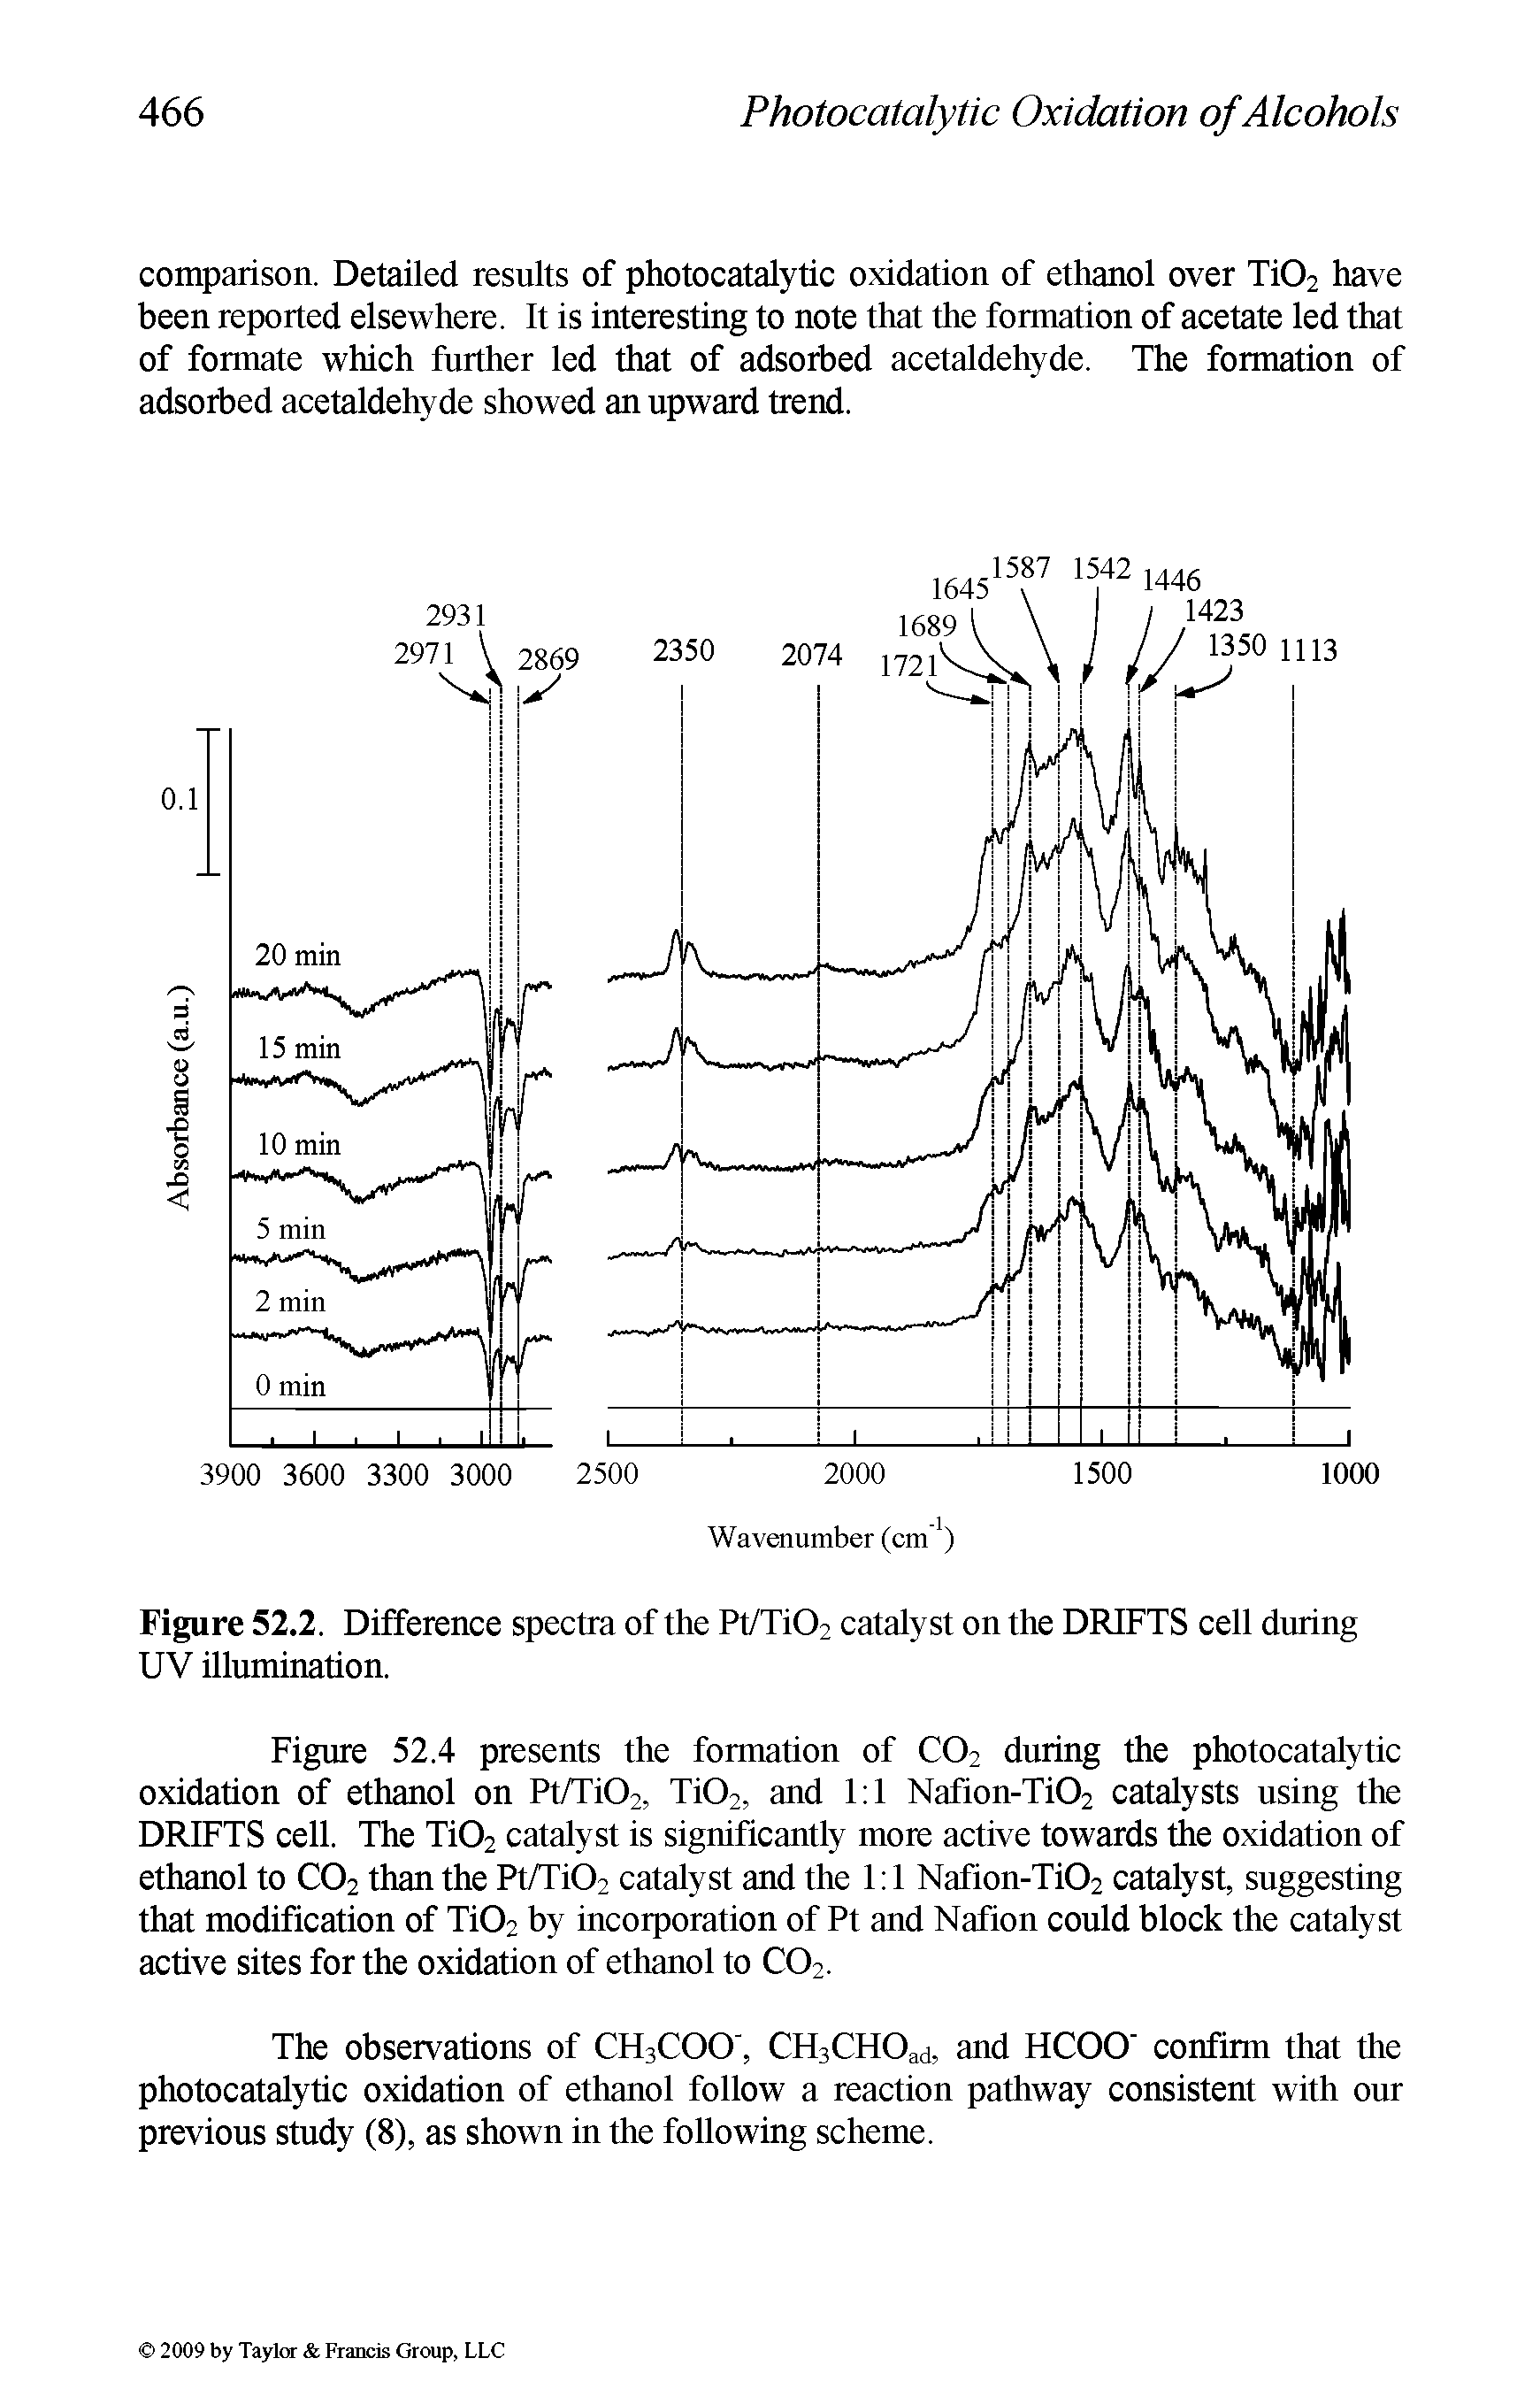 Figure 52.2. Difference spectra of the Pt/Ti02 catalyst on the DRIFTS cell during UV illumination.